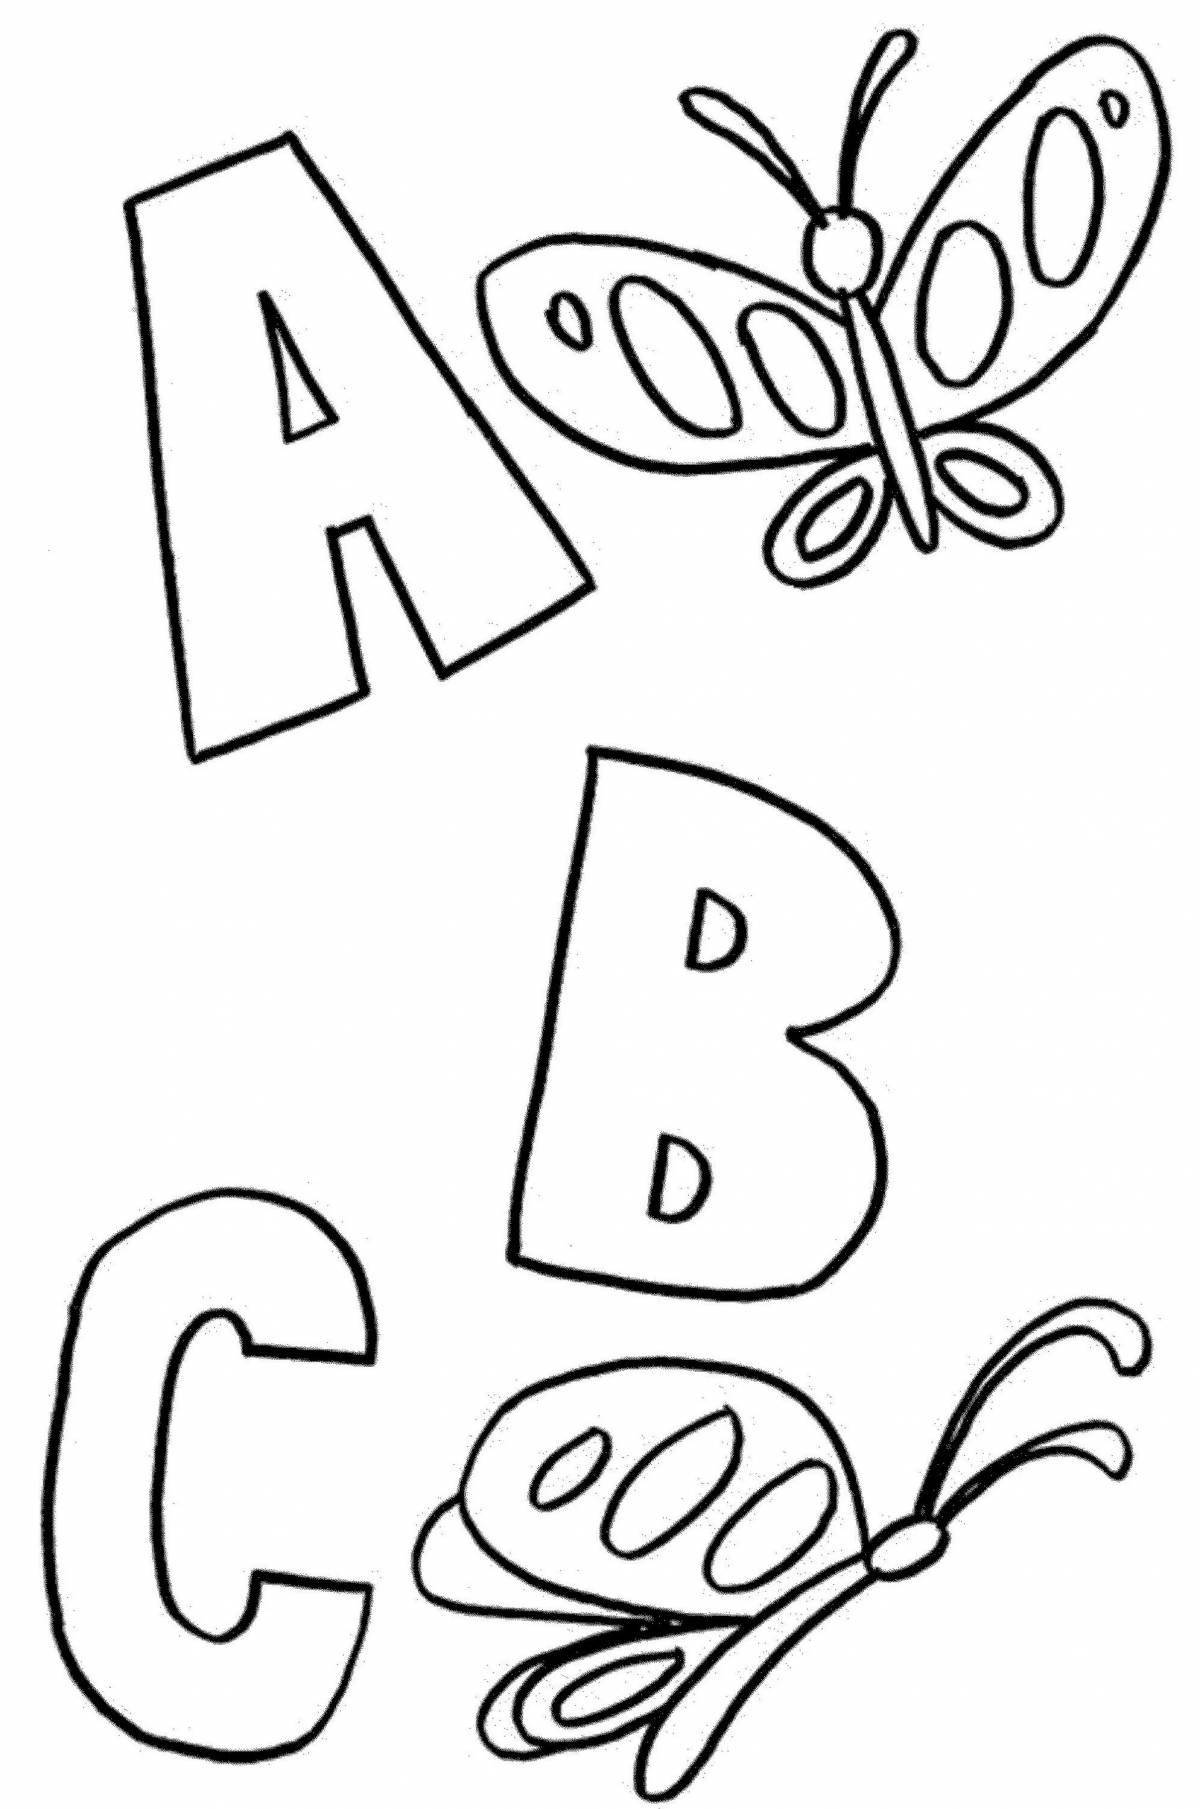 Fun abc coloring book for kids